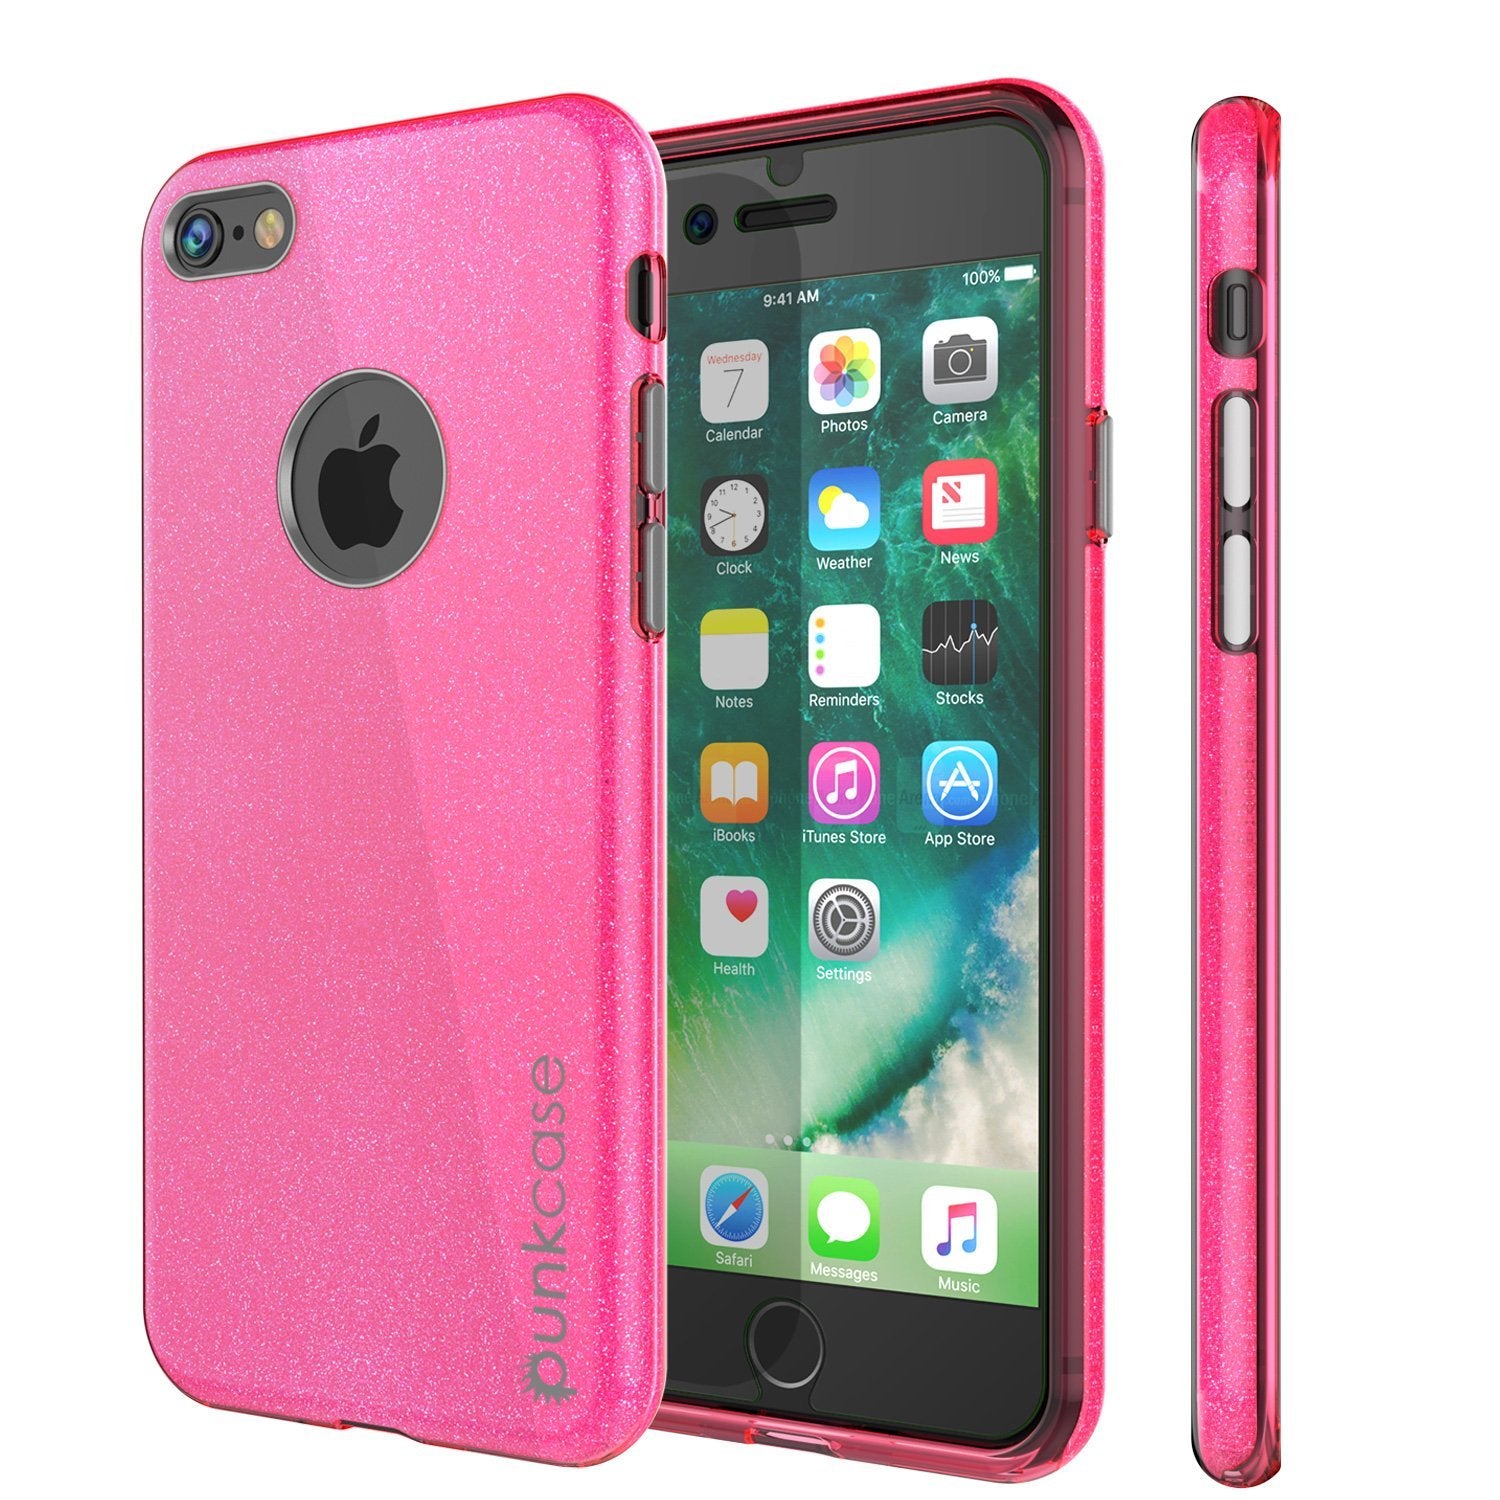 iPhone SE (4.7") Case, Punkcase Galactic 2.0 Series Ultra Slim Protective Armor TPU Cover [Pink]